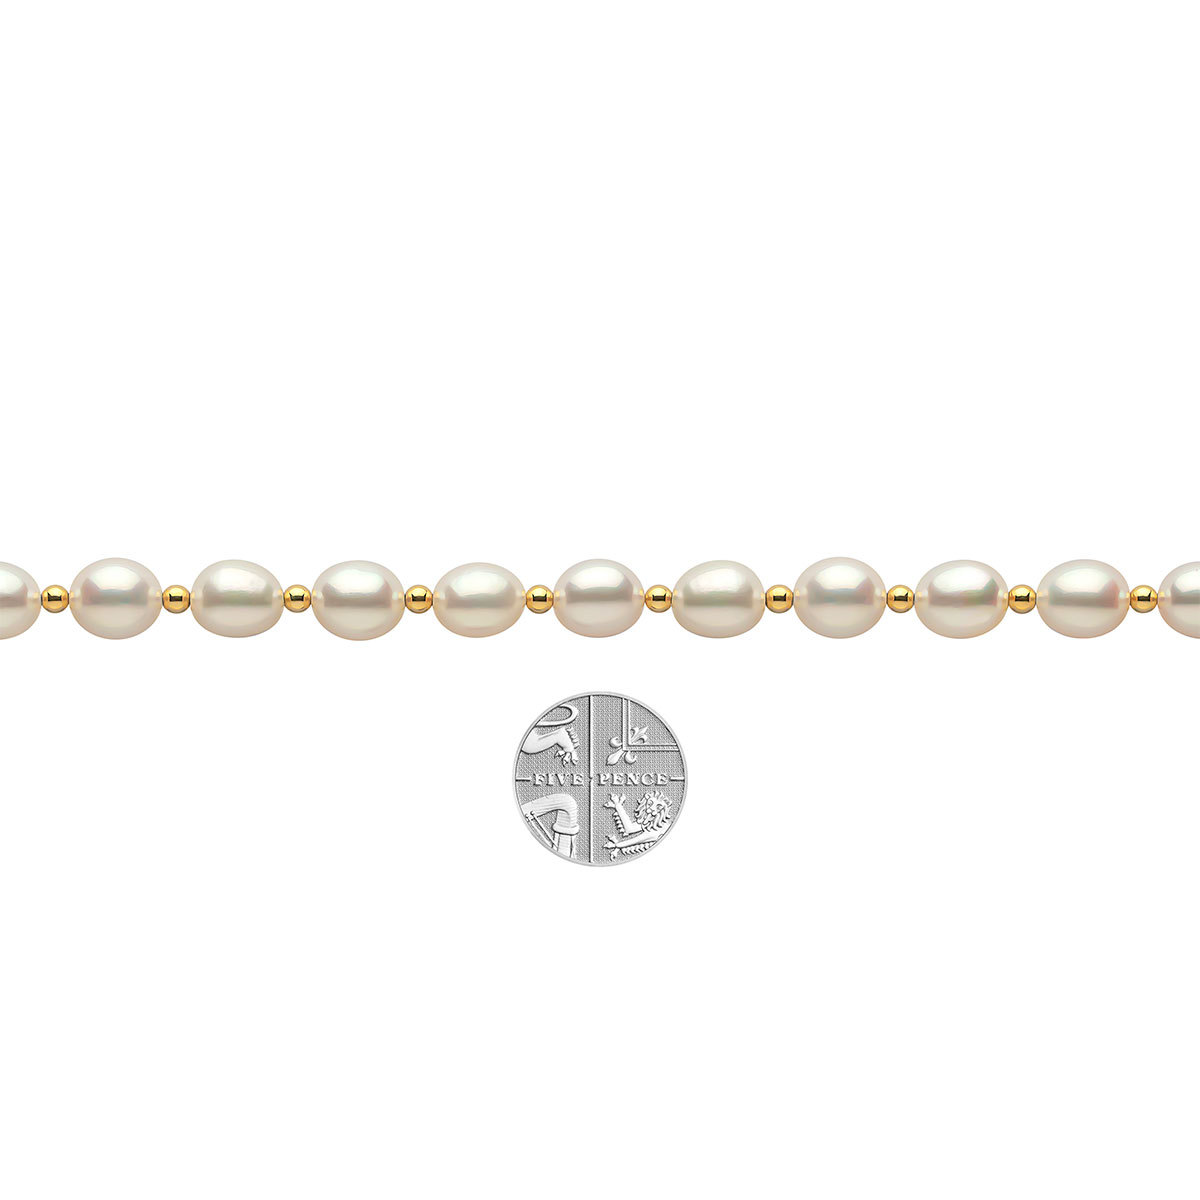 8-8.5mm Cultured Freshwater White Oval Pearl and Gold Bead Bracelet, 18ct Yellow Gold